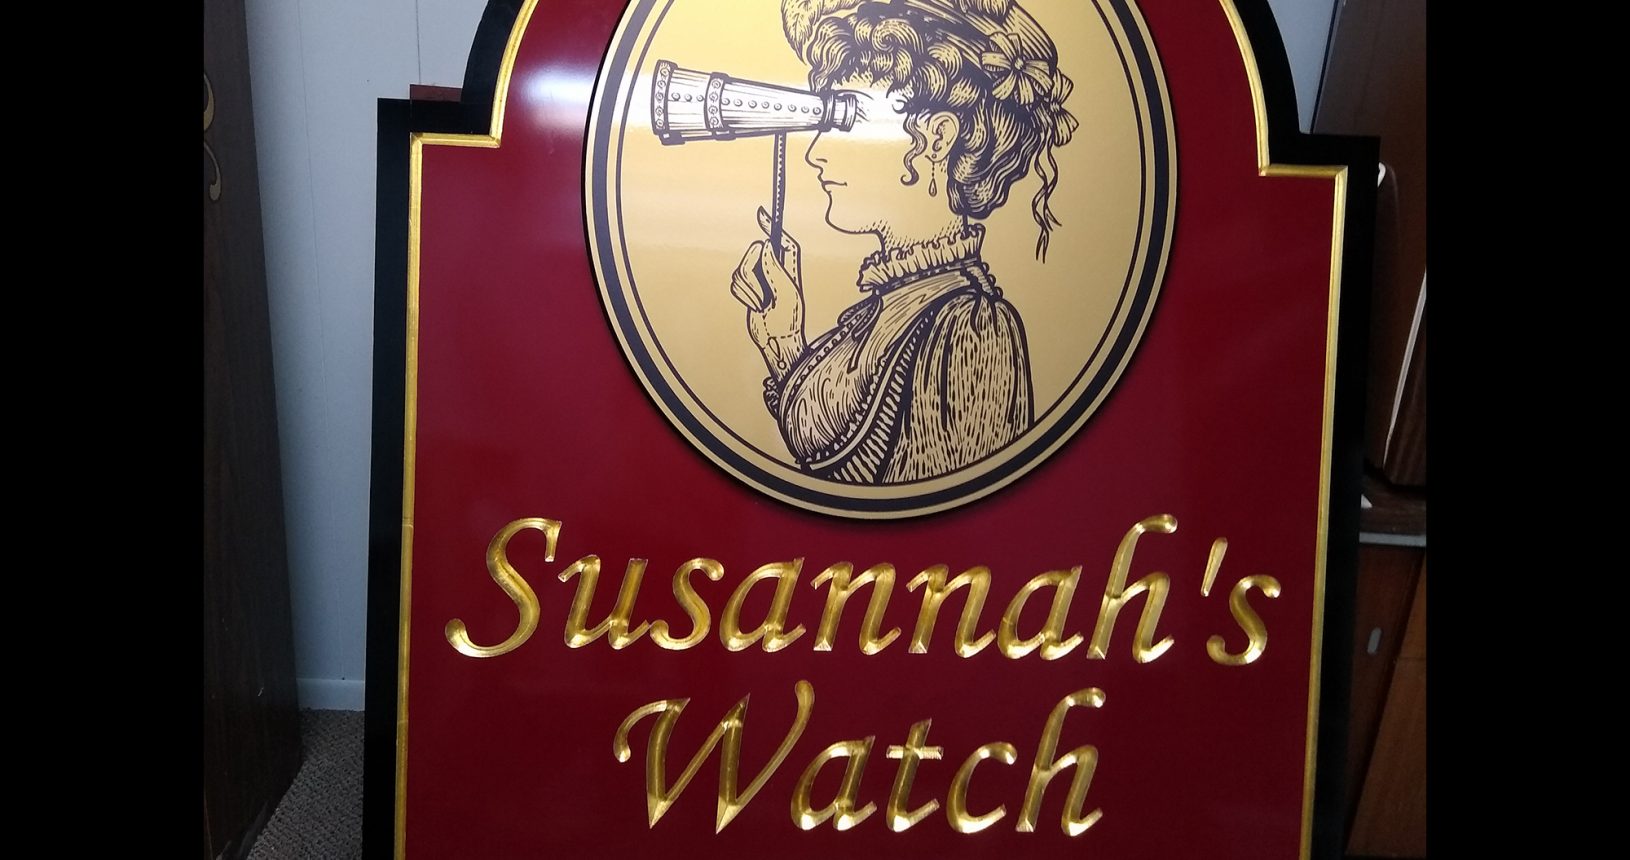 Susannah's Watch engraved sign